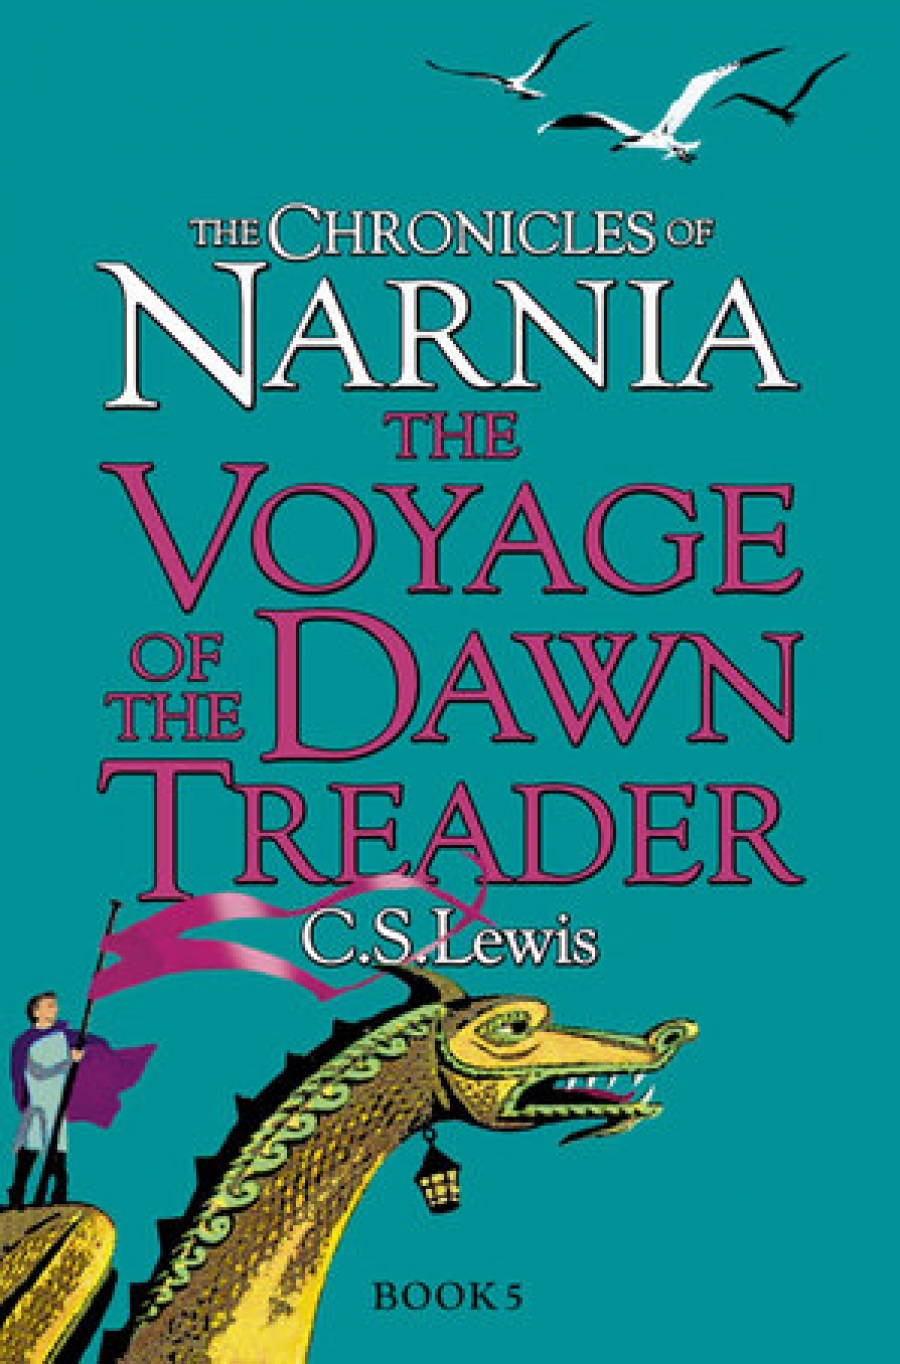 Lewis C. S. Lewis C. S. The Chronicles of Narnia 5. The Voyage of the Dawn Treader 